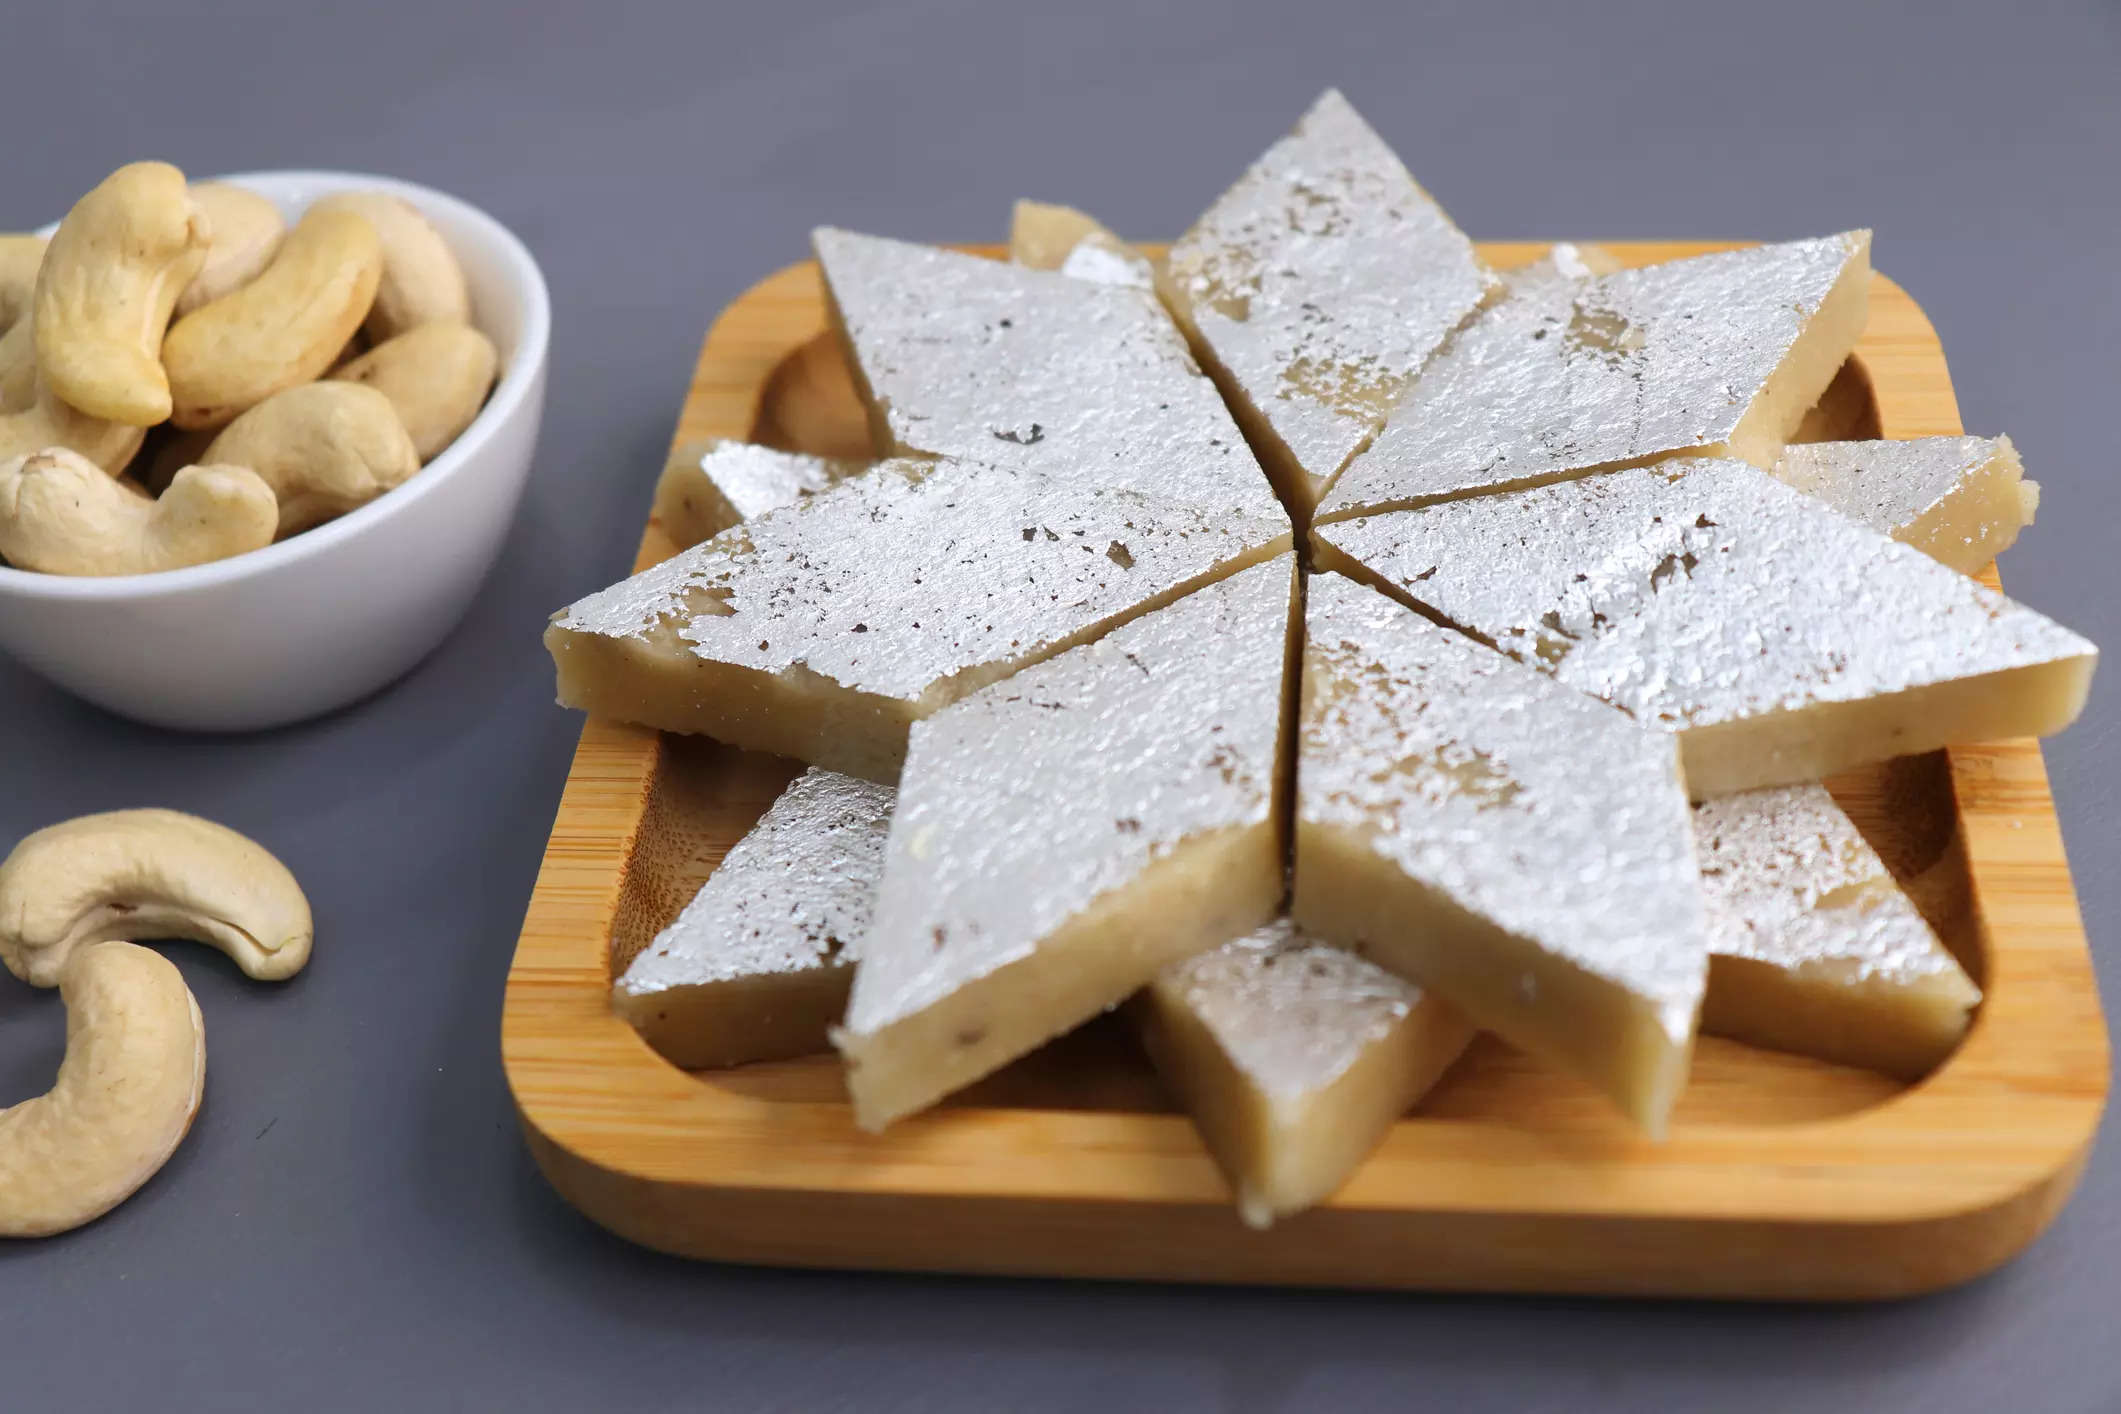 Despite being slightly on the healthier side with less sugar kaju katli is a high-calorie dessert Therefore try to keep portion control in mind  avoid binge-eating it to avoid weight gain blood sugar and cholesterol surge